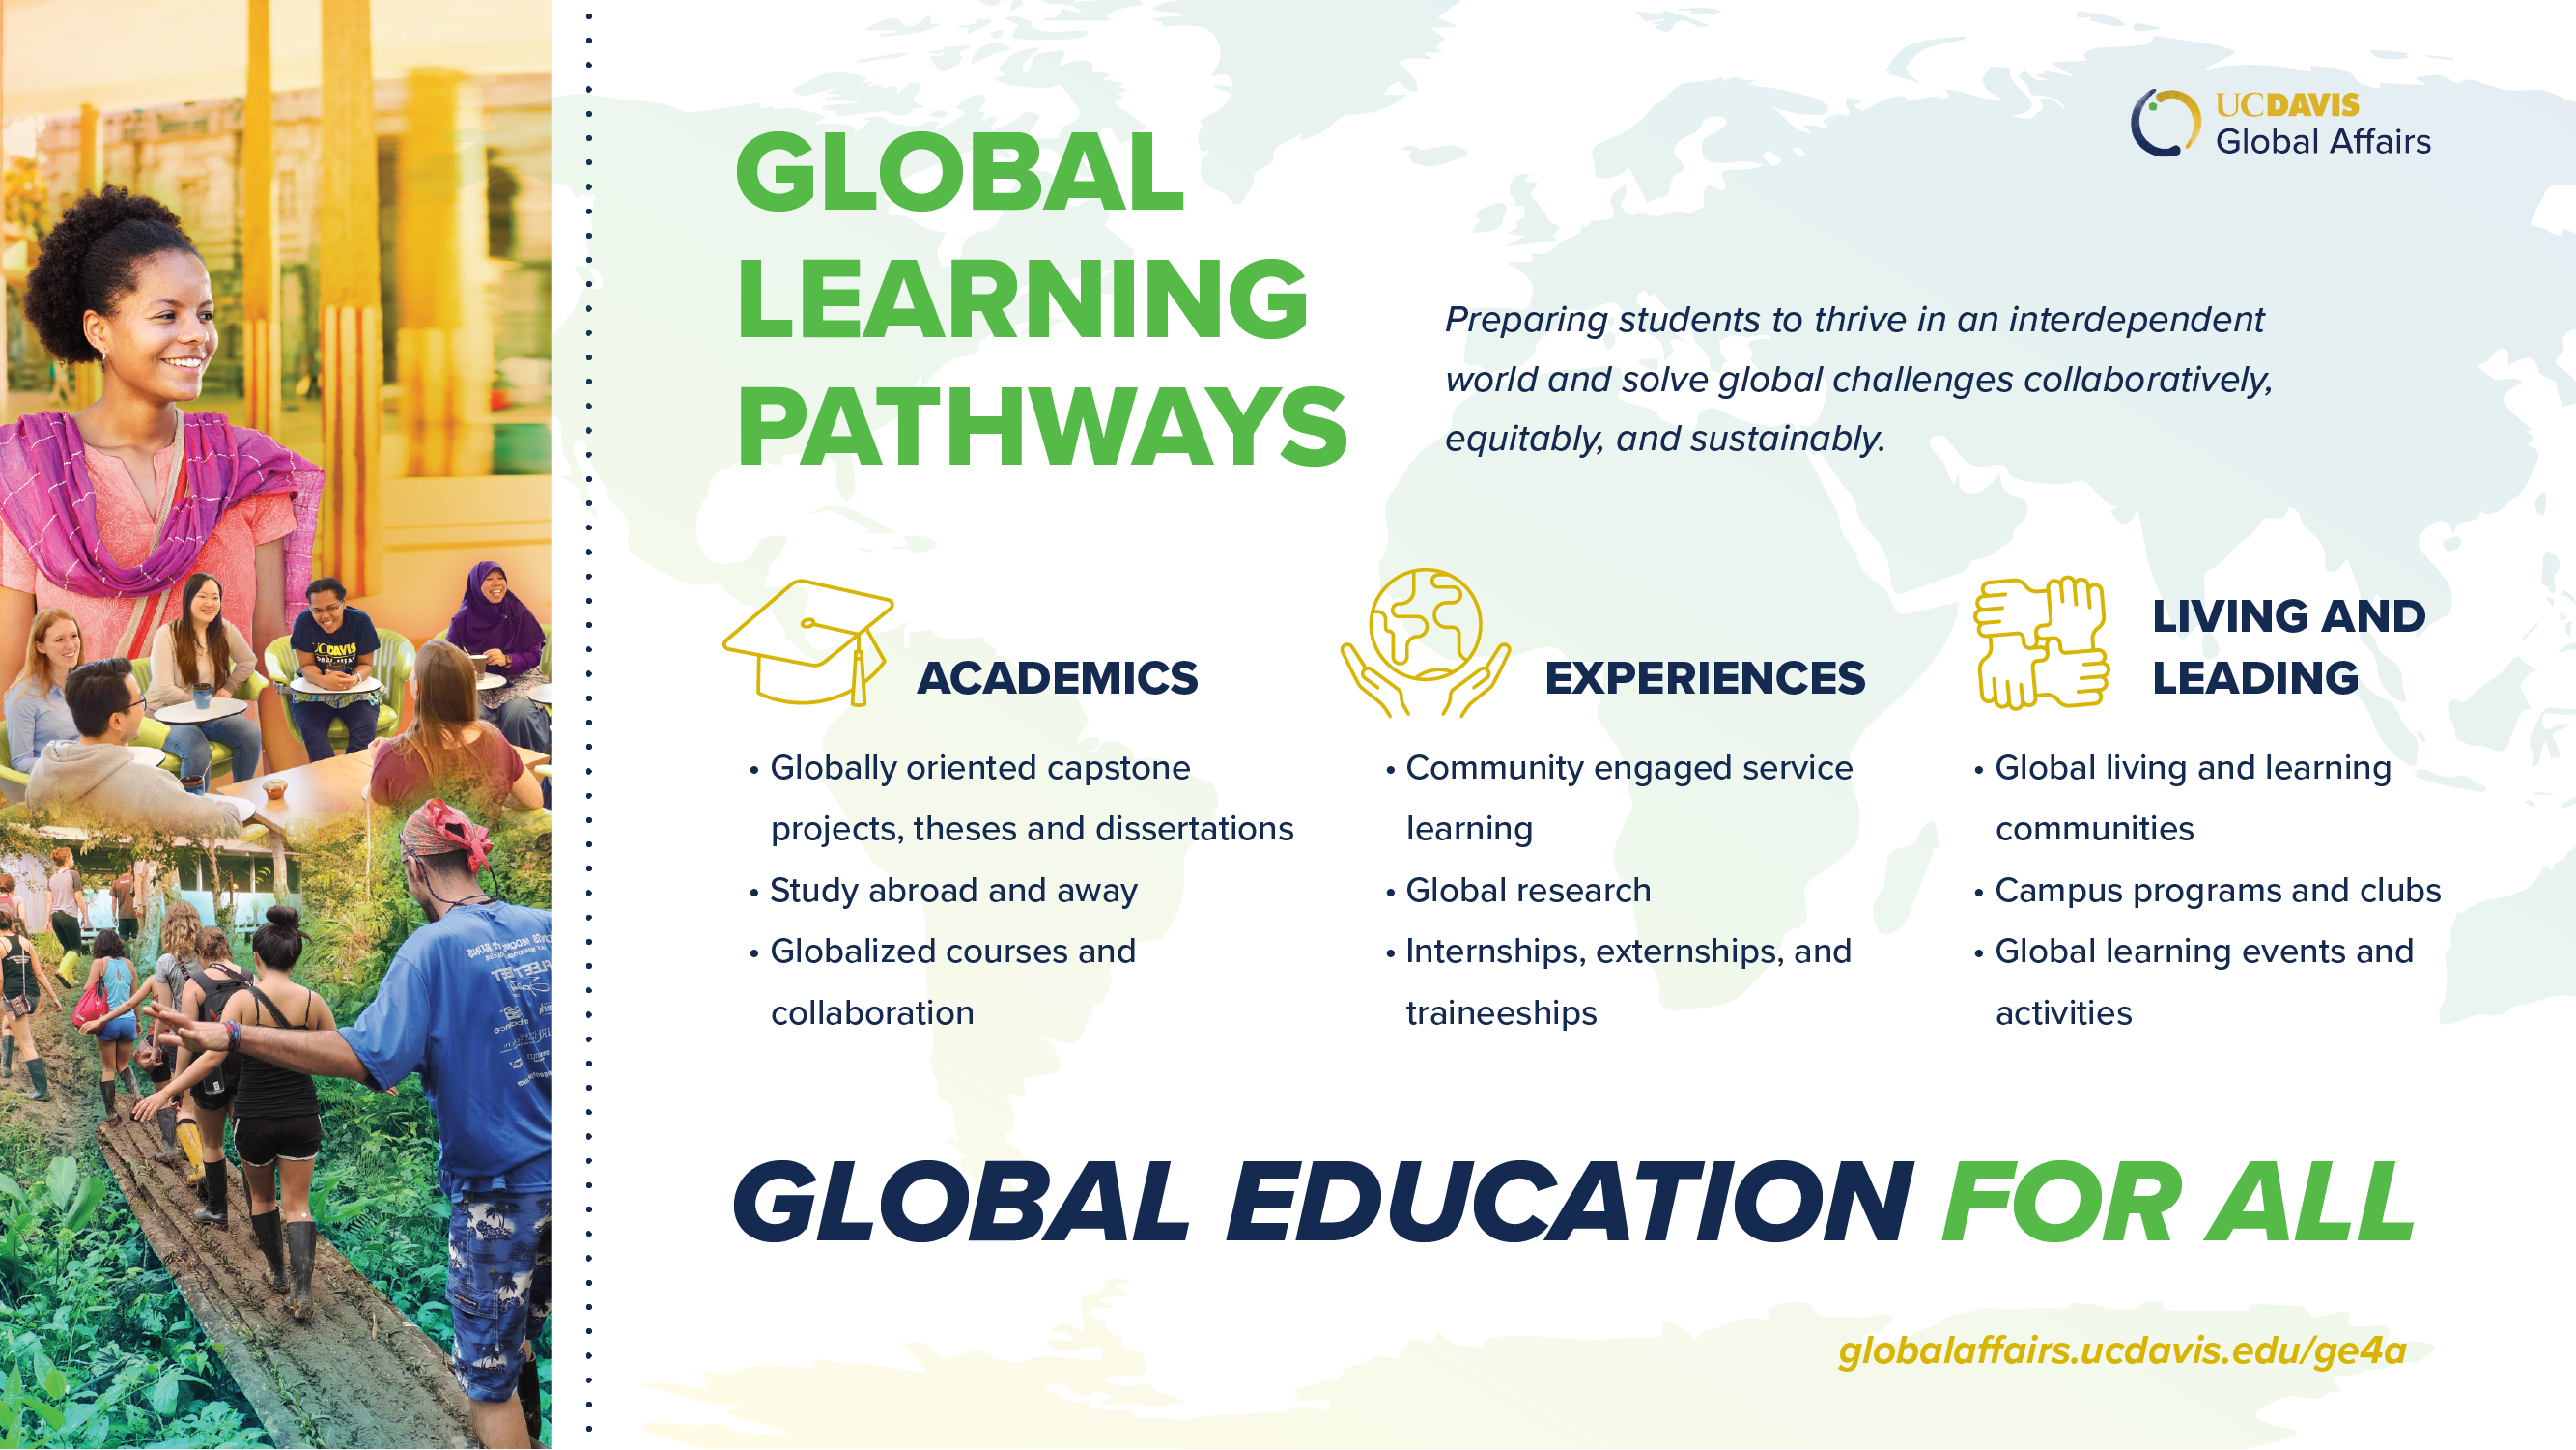 Graphic with: Academics (globally oriented capstone projects, theses and dissertations; study abroad and away; globalized courses and collaboration. Experiences (community engaged service learning; global research; internships, externships and traineeships). Living and Leading (global living and learning communities; campus programs and clubs; global learning events and activities). Global Learning Pathways are preparing students to thrive in an interdependent world and solve global challenges collaboratively, equitably, and sustainably.